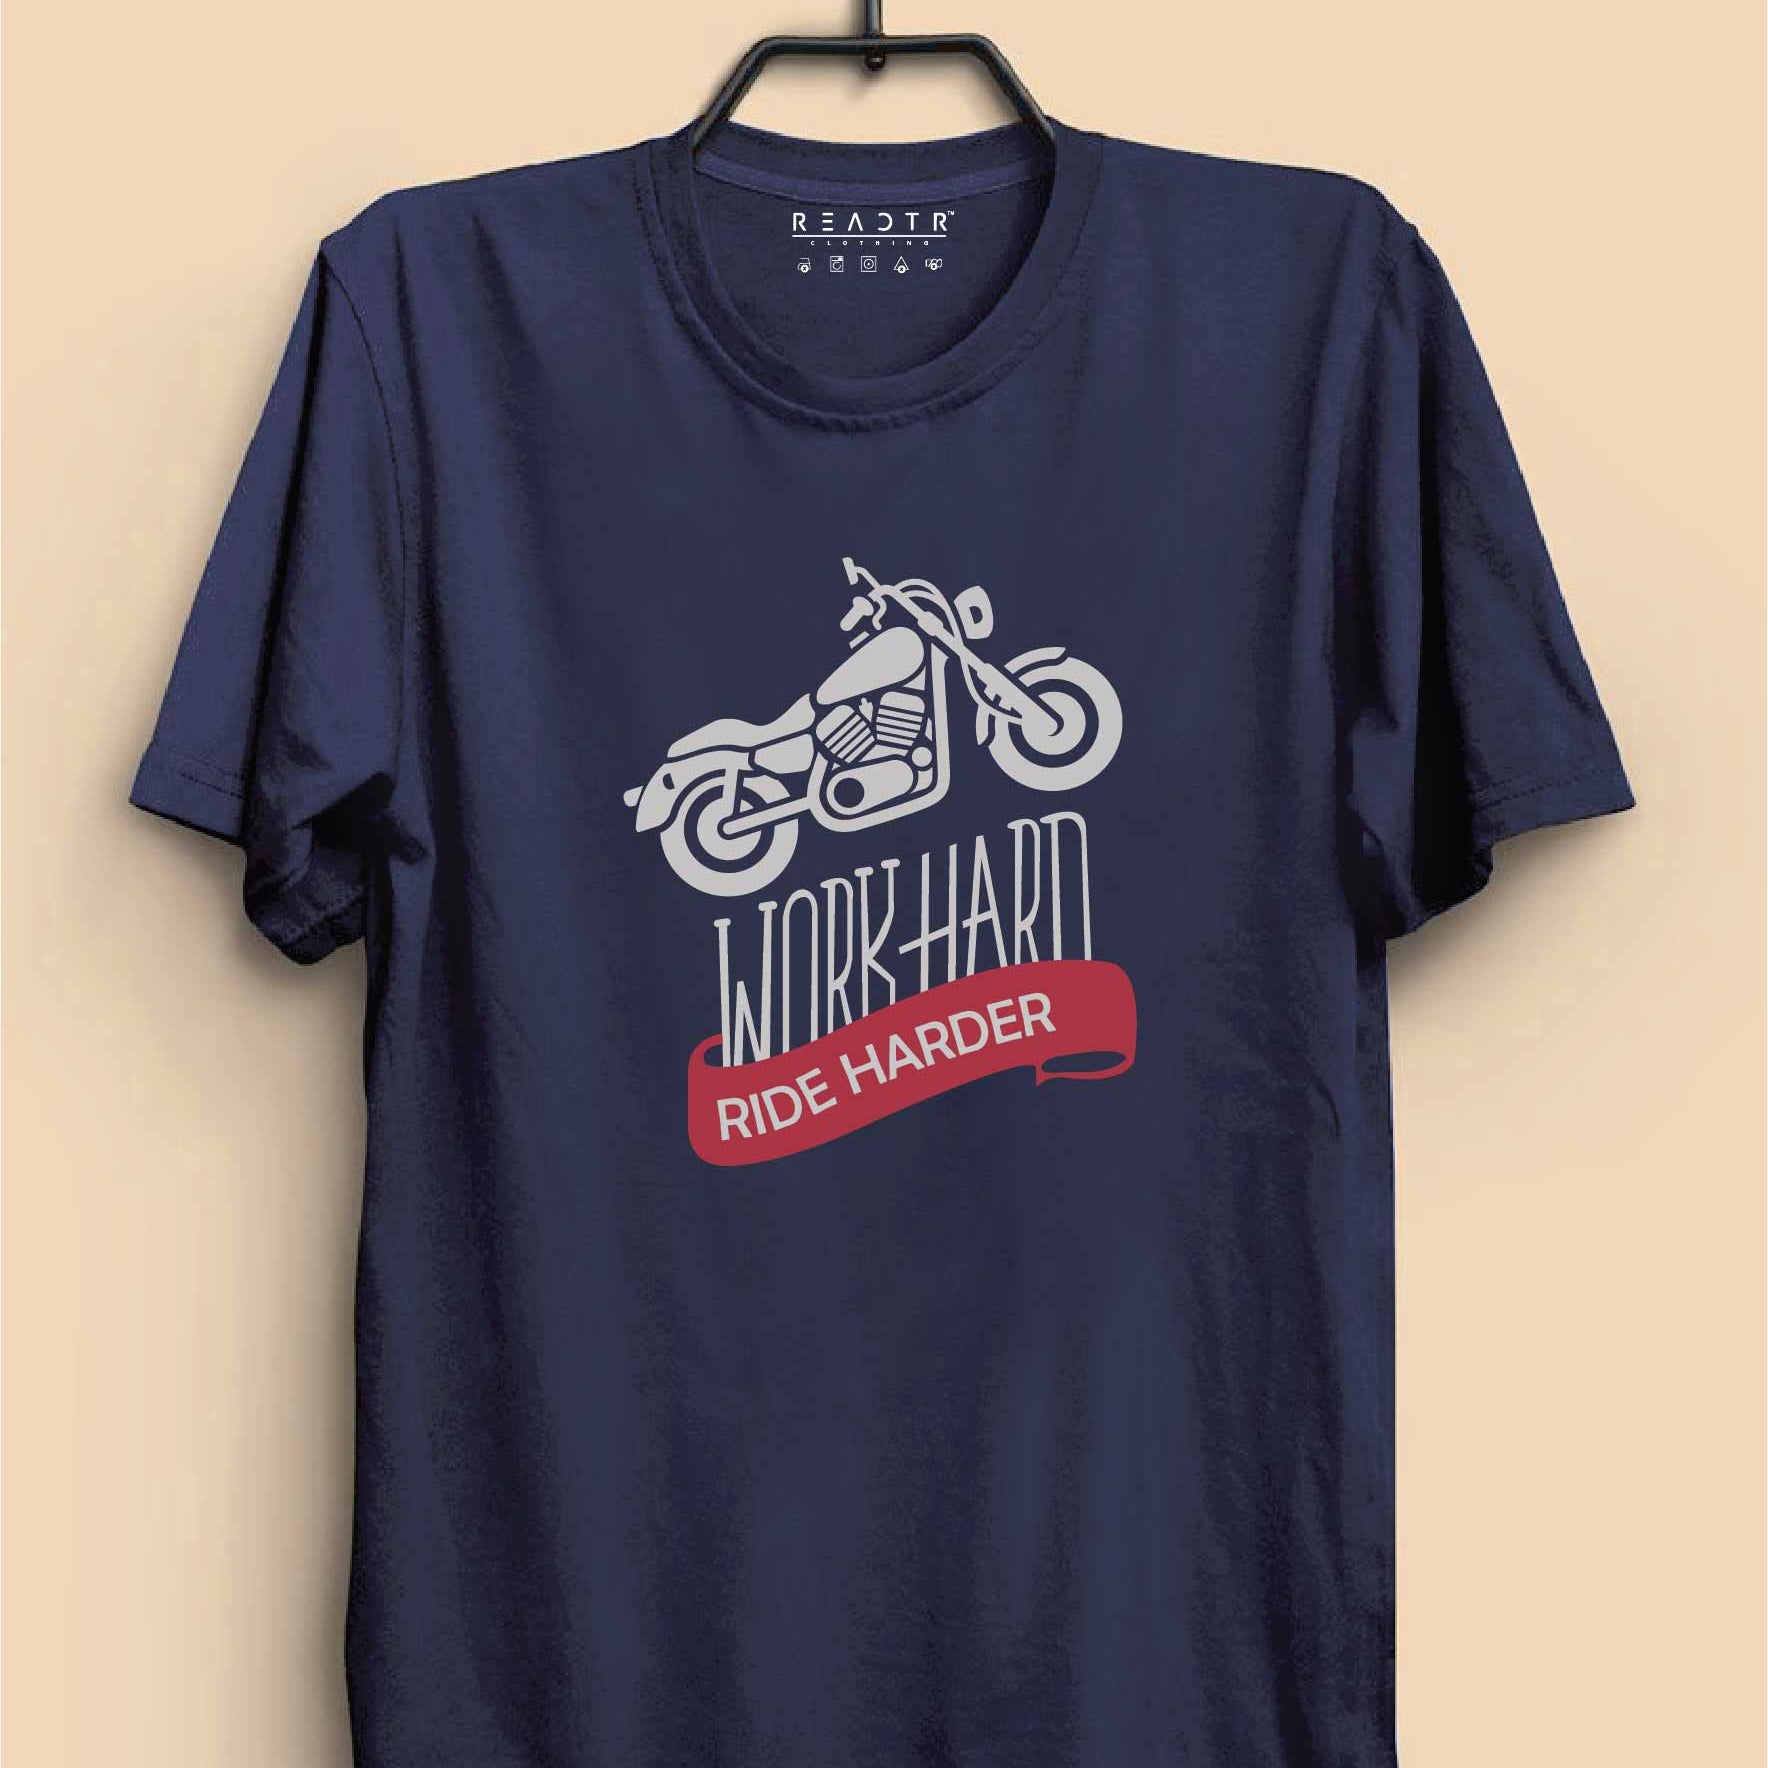 Eat sleep ride repeat t-shirt design for motorcycle lovers 6749127